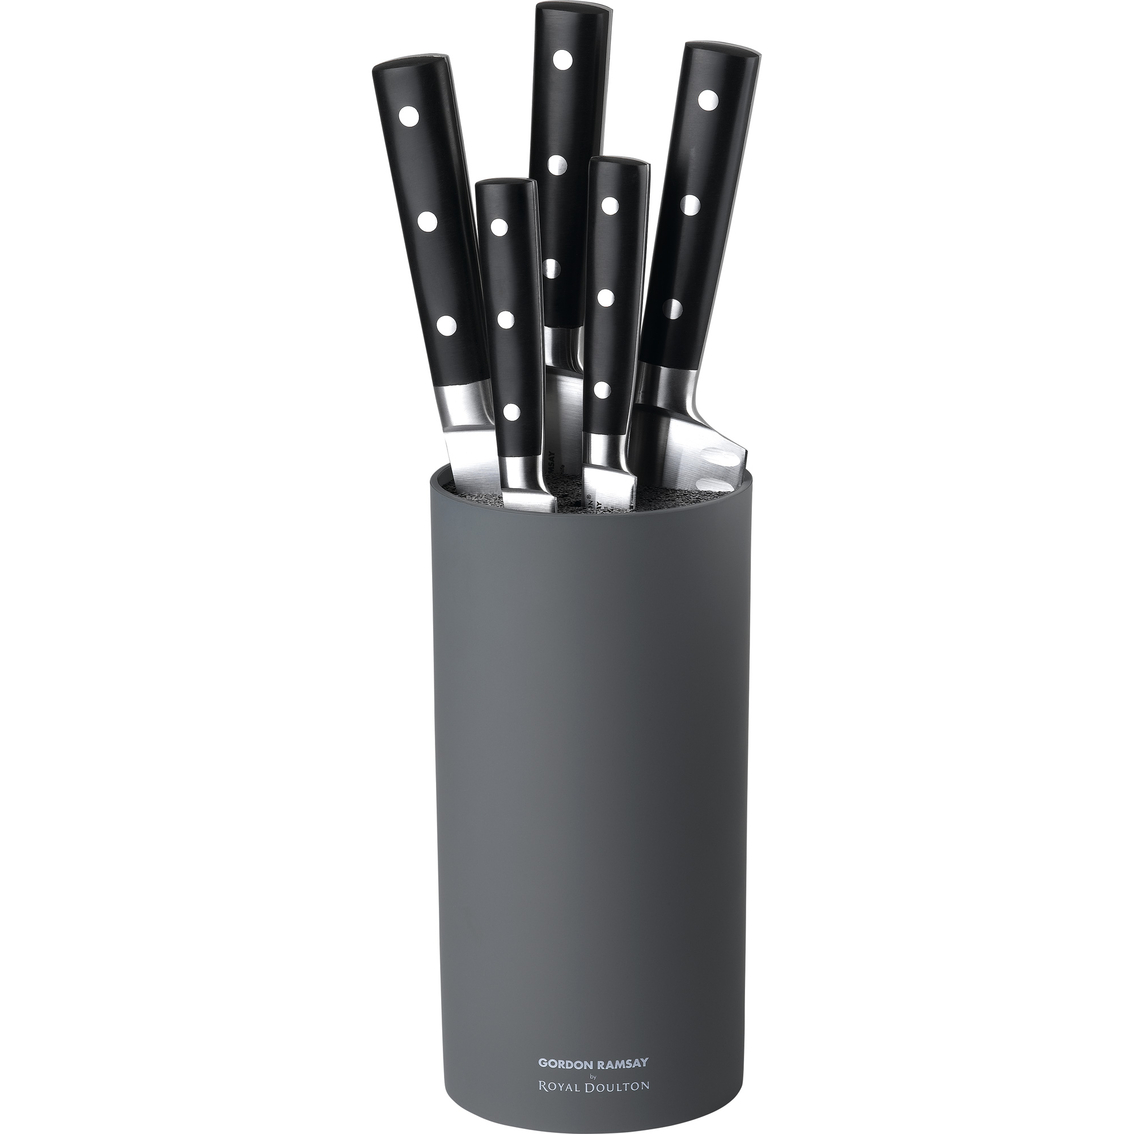 Buy Gordon Ramsay by Royal Doulton Stainless-Steel 8-Piece